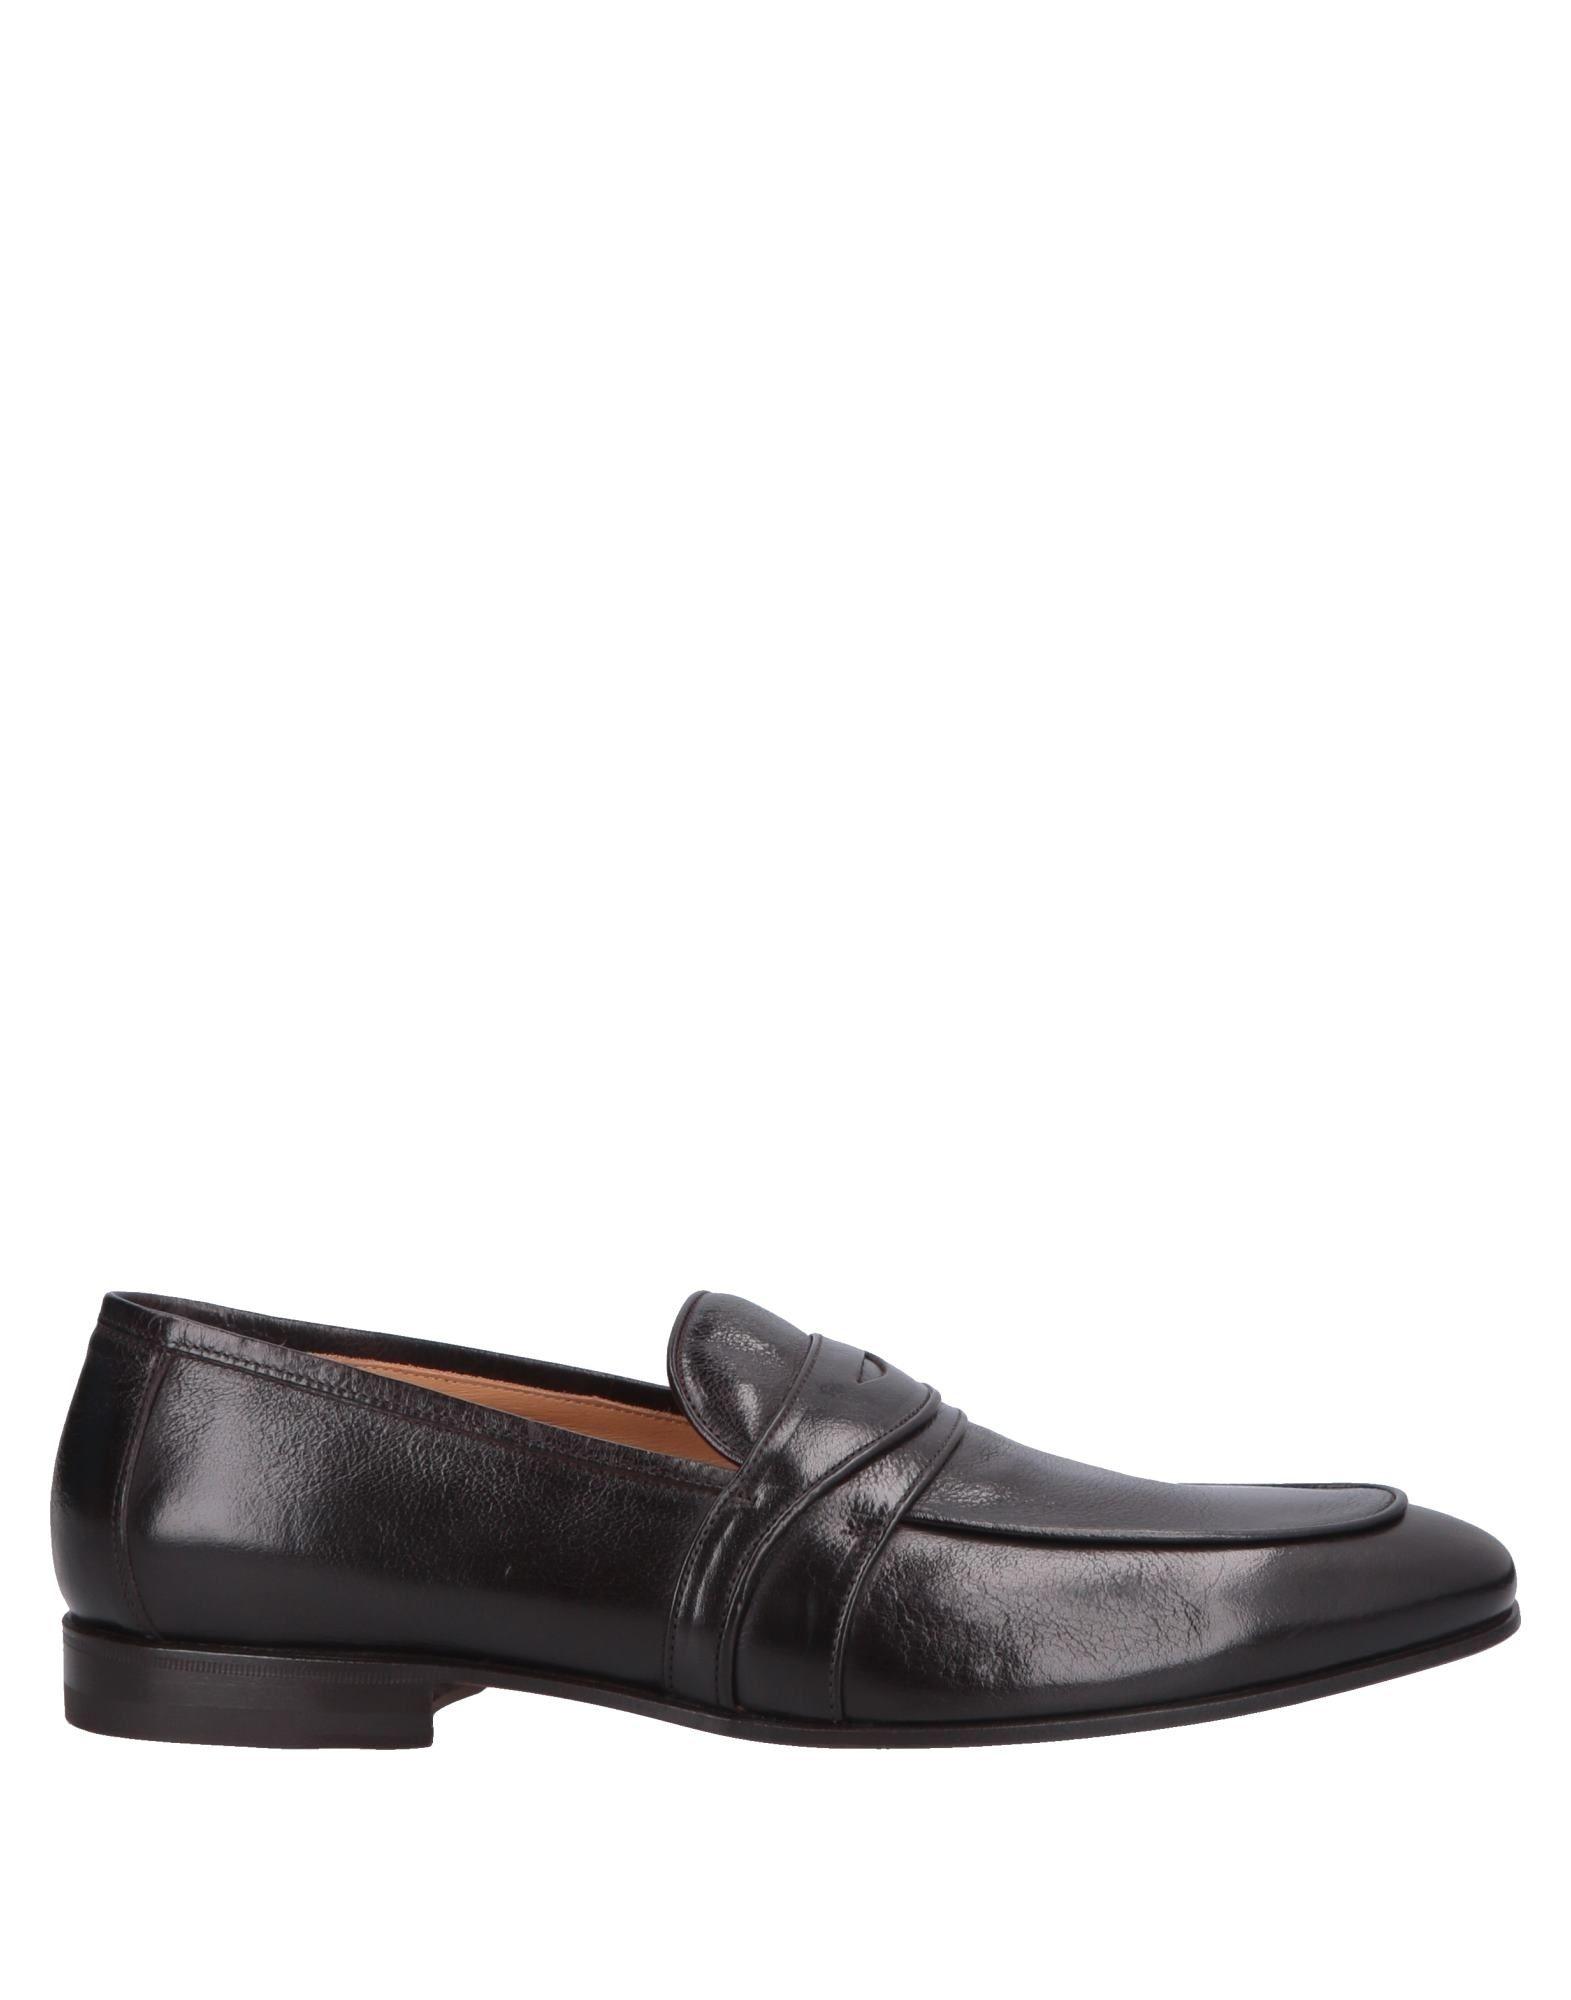 Sergio Rossi Leather Loafer in Dark Brown (Brown) for Men - Lyst